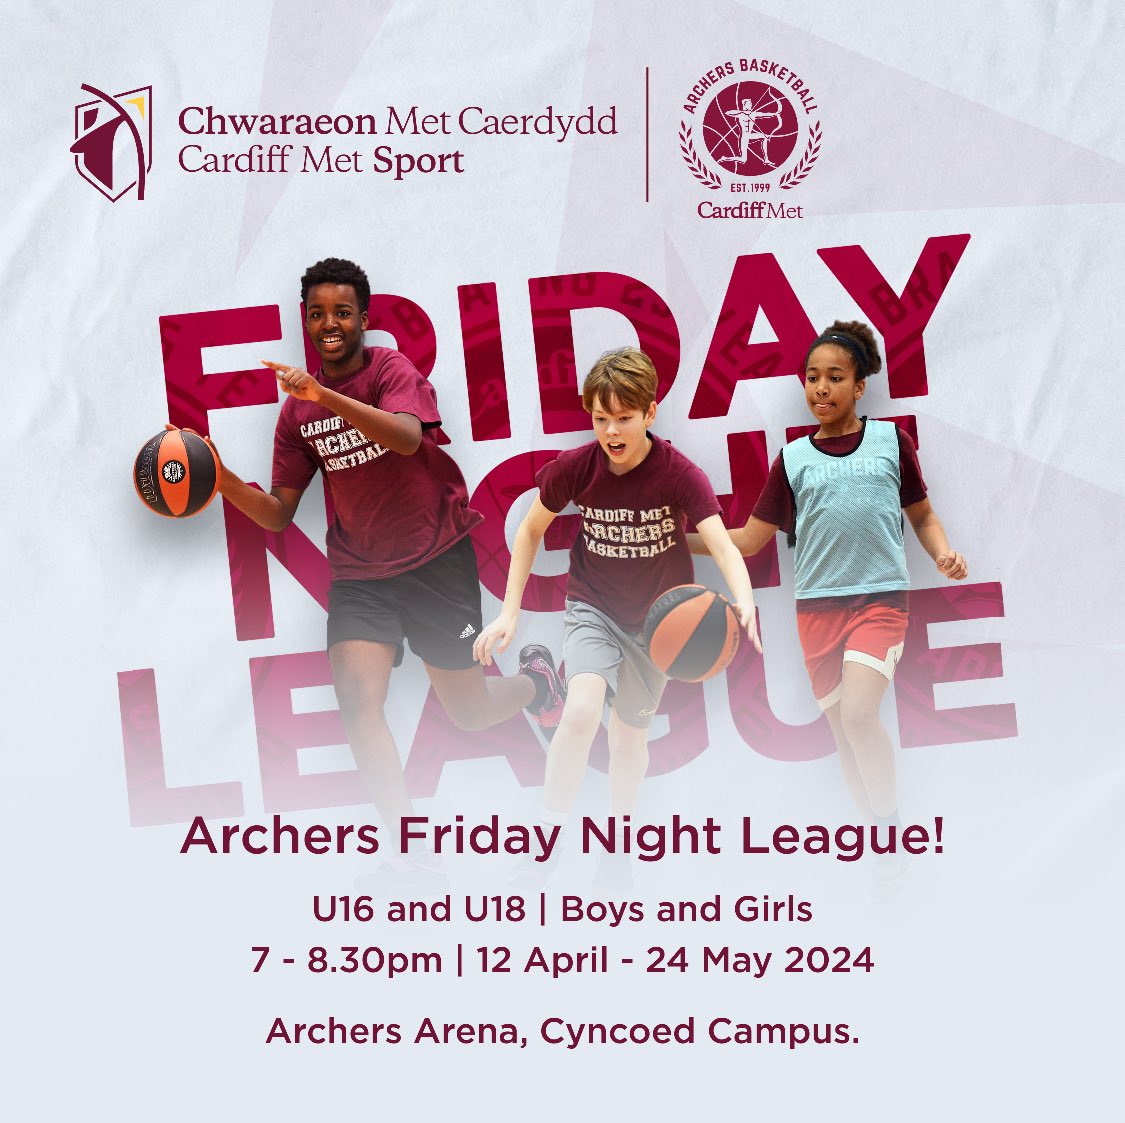 𝗙𝗿𝗶𝗱𝗮𝘆 𝗡𝗶𝗴𝗵𝘁 𝗟𝗲𝗮𝗴𝘂𝗲 The league will run for 6 weeks from Fri 12th April-24th May (excluding 17th May). Spaces are limited so sign up by Wednesday 10th April to secure your space. All clubs welcome! Don’t miss out👇 ejw.appmicrosite.com/micro/info/1dd… #ArcherFamily25